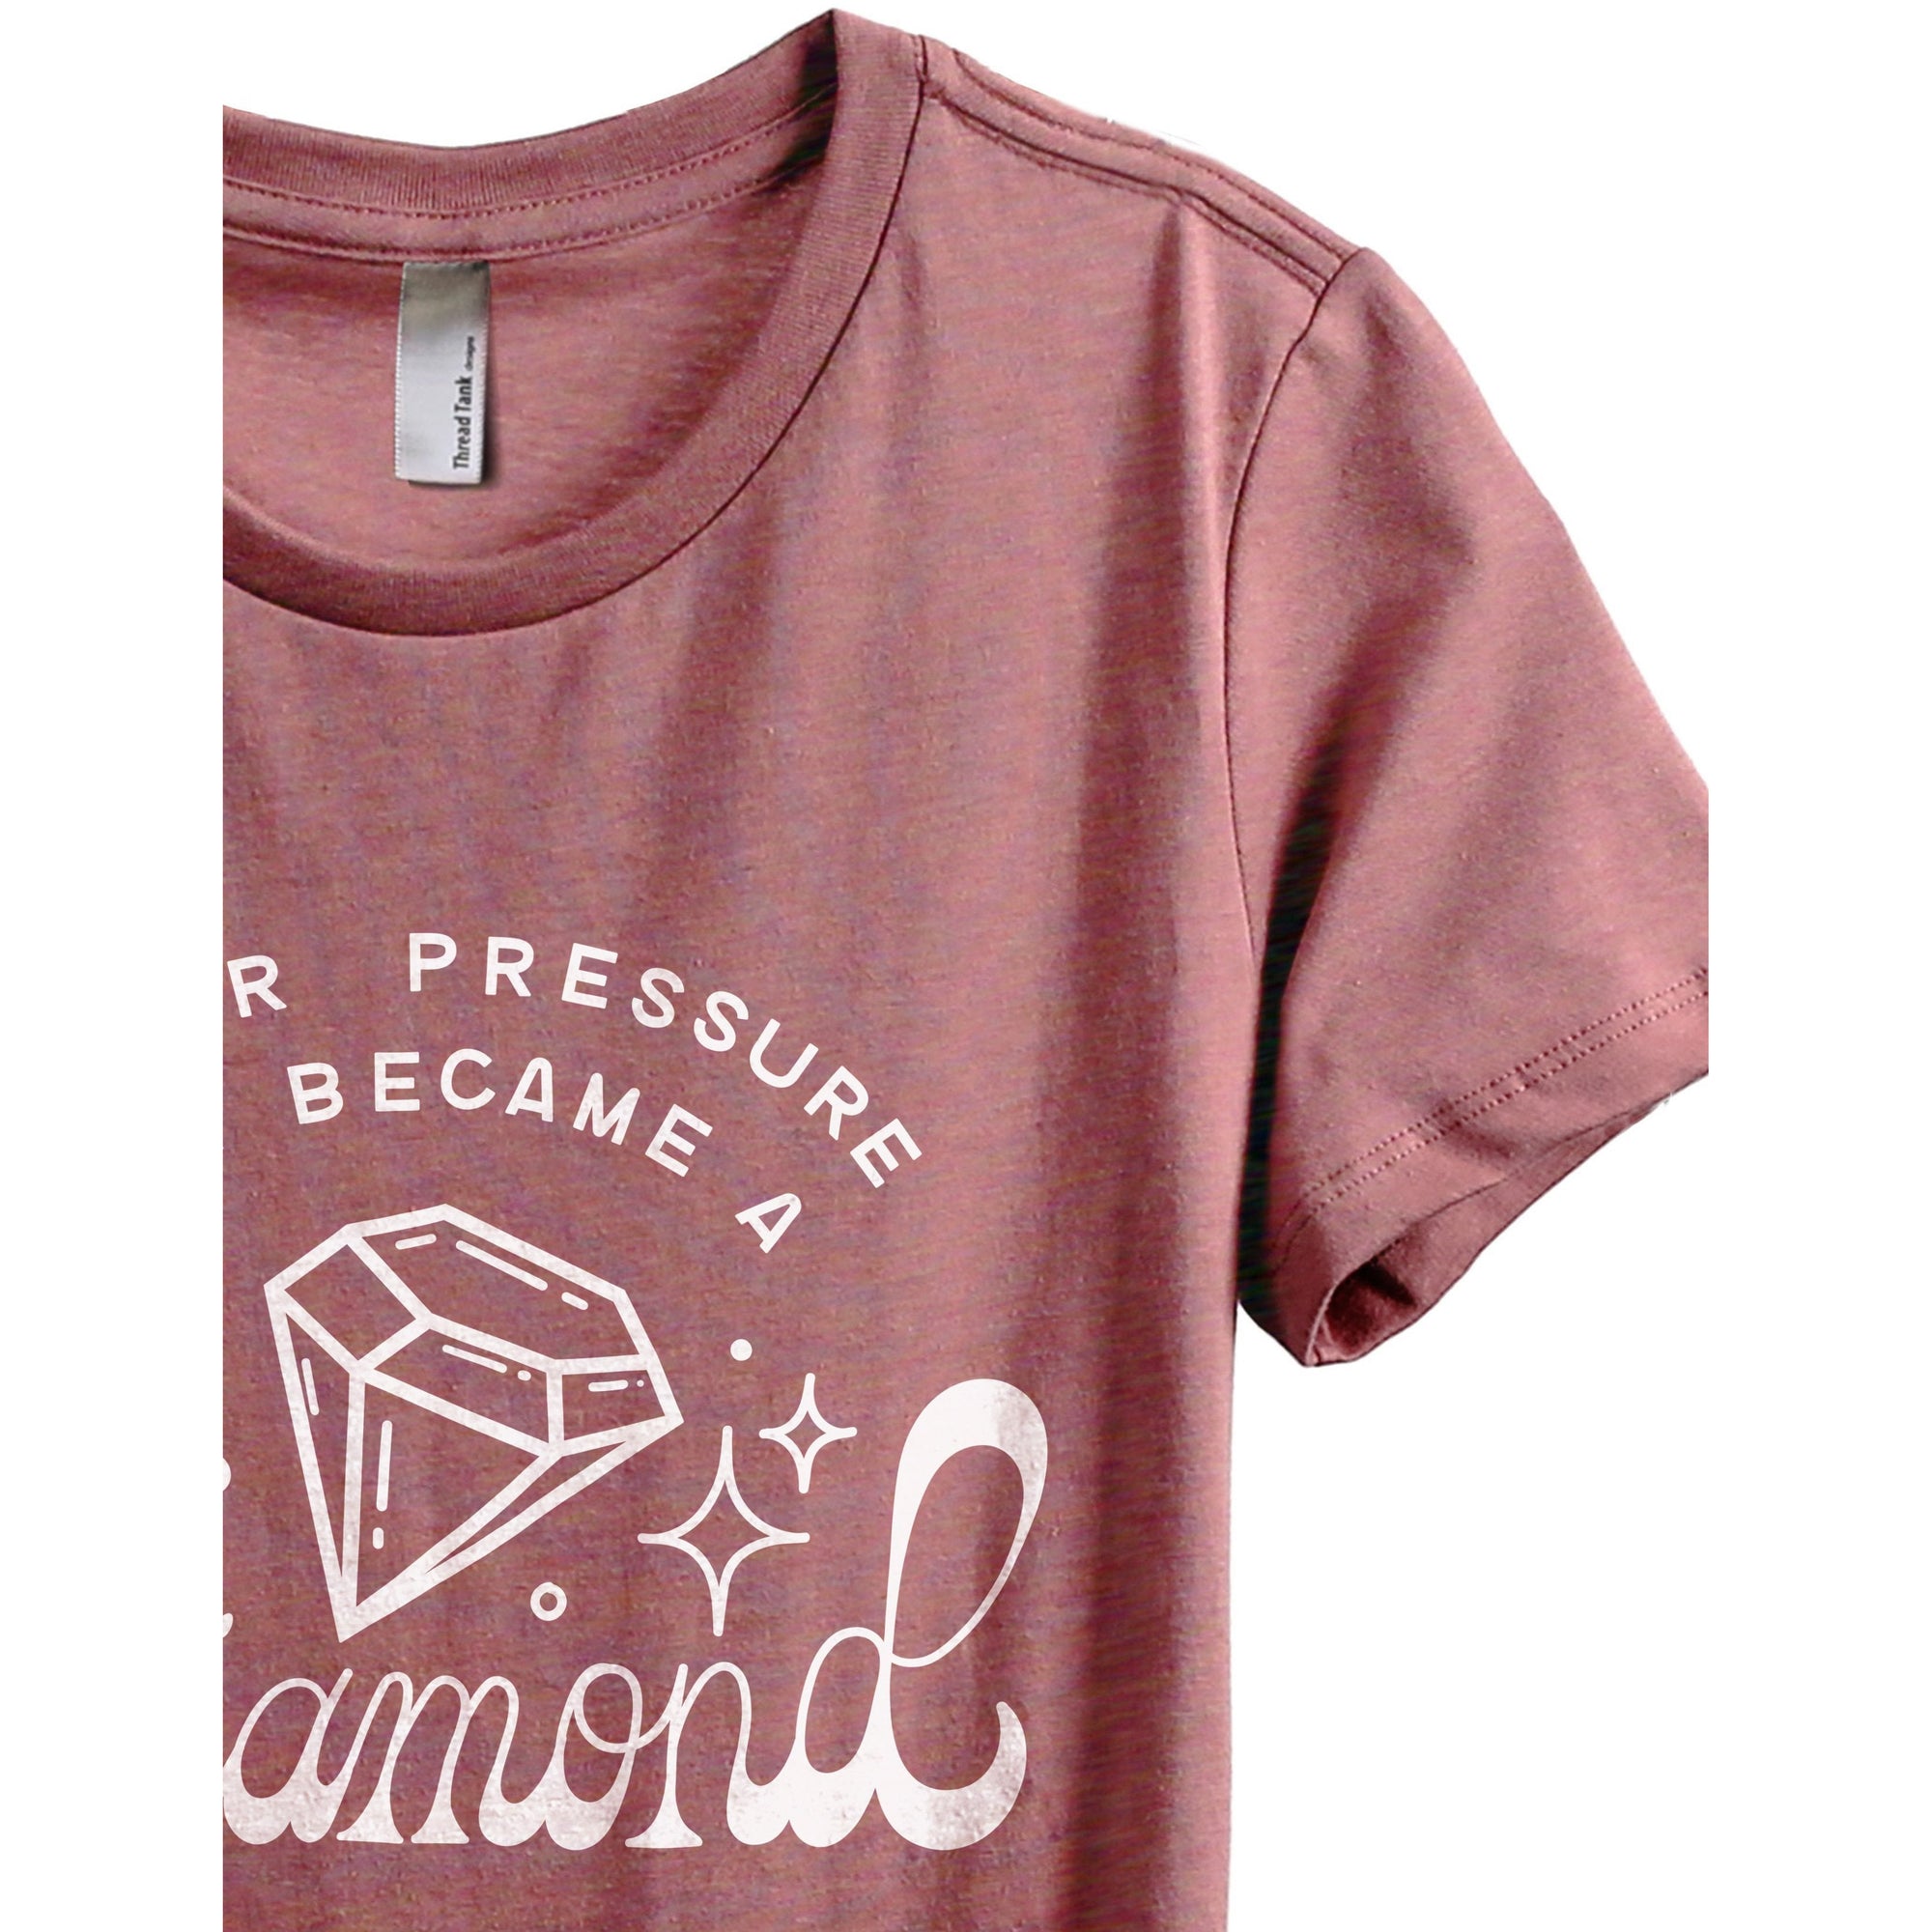 Under Pressure She Became A Diamond - Stories You Can Wear by Thread Tank